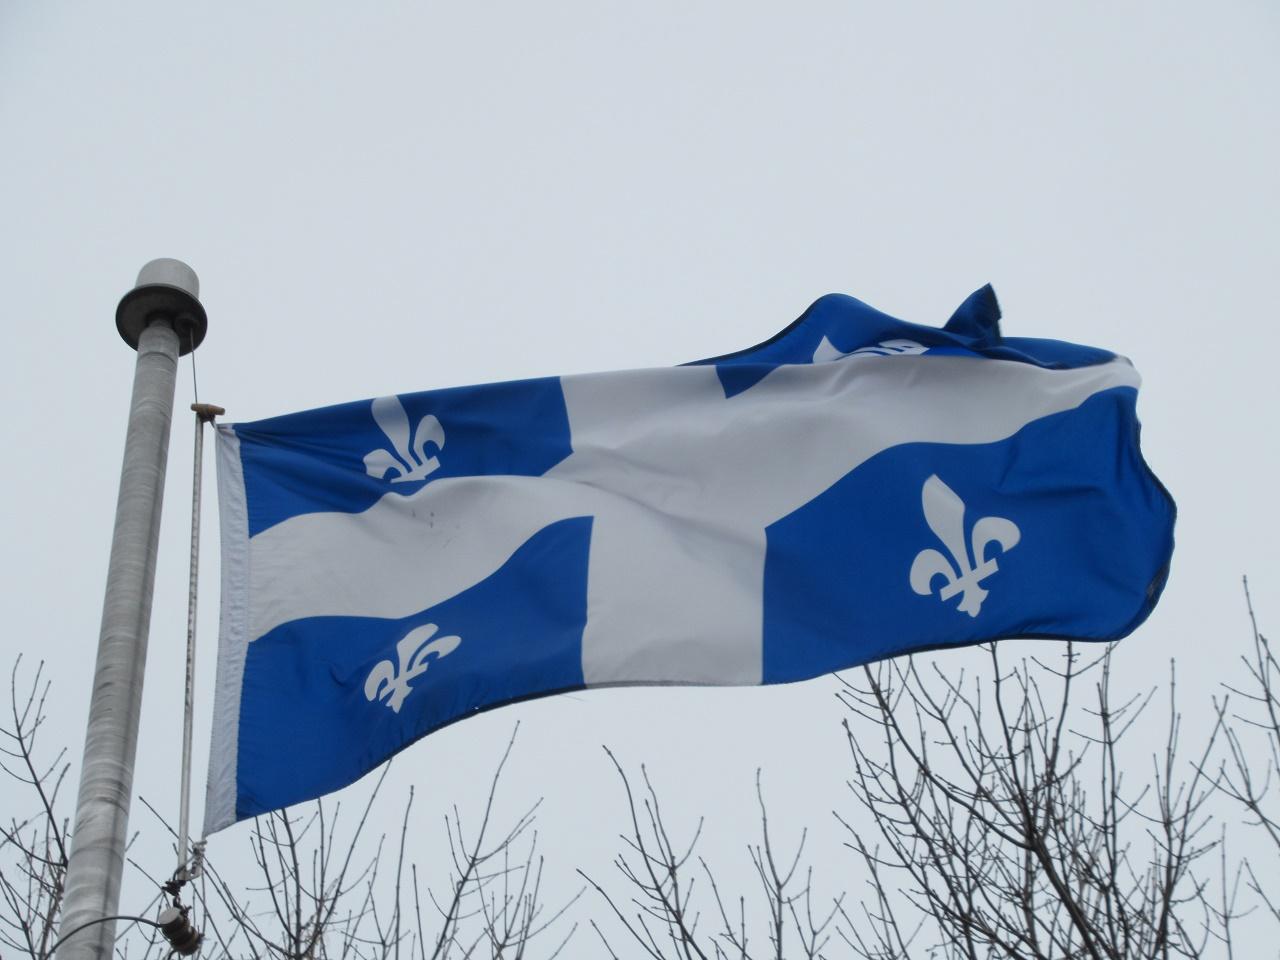 Campgrounds, marinas, and tourist accommodations in Québec to reopen on June 1